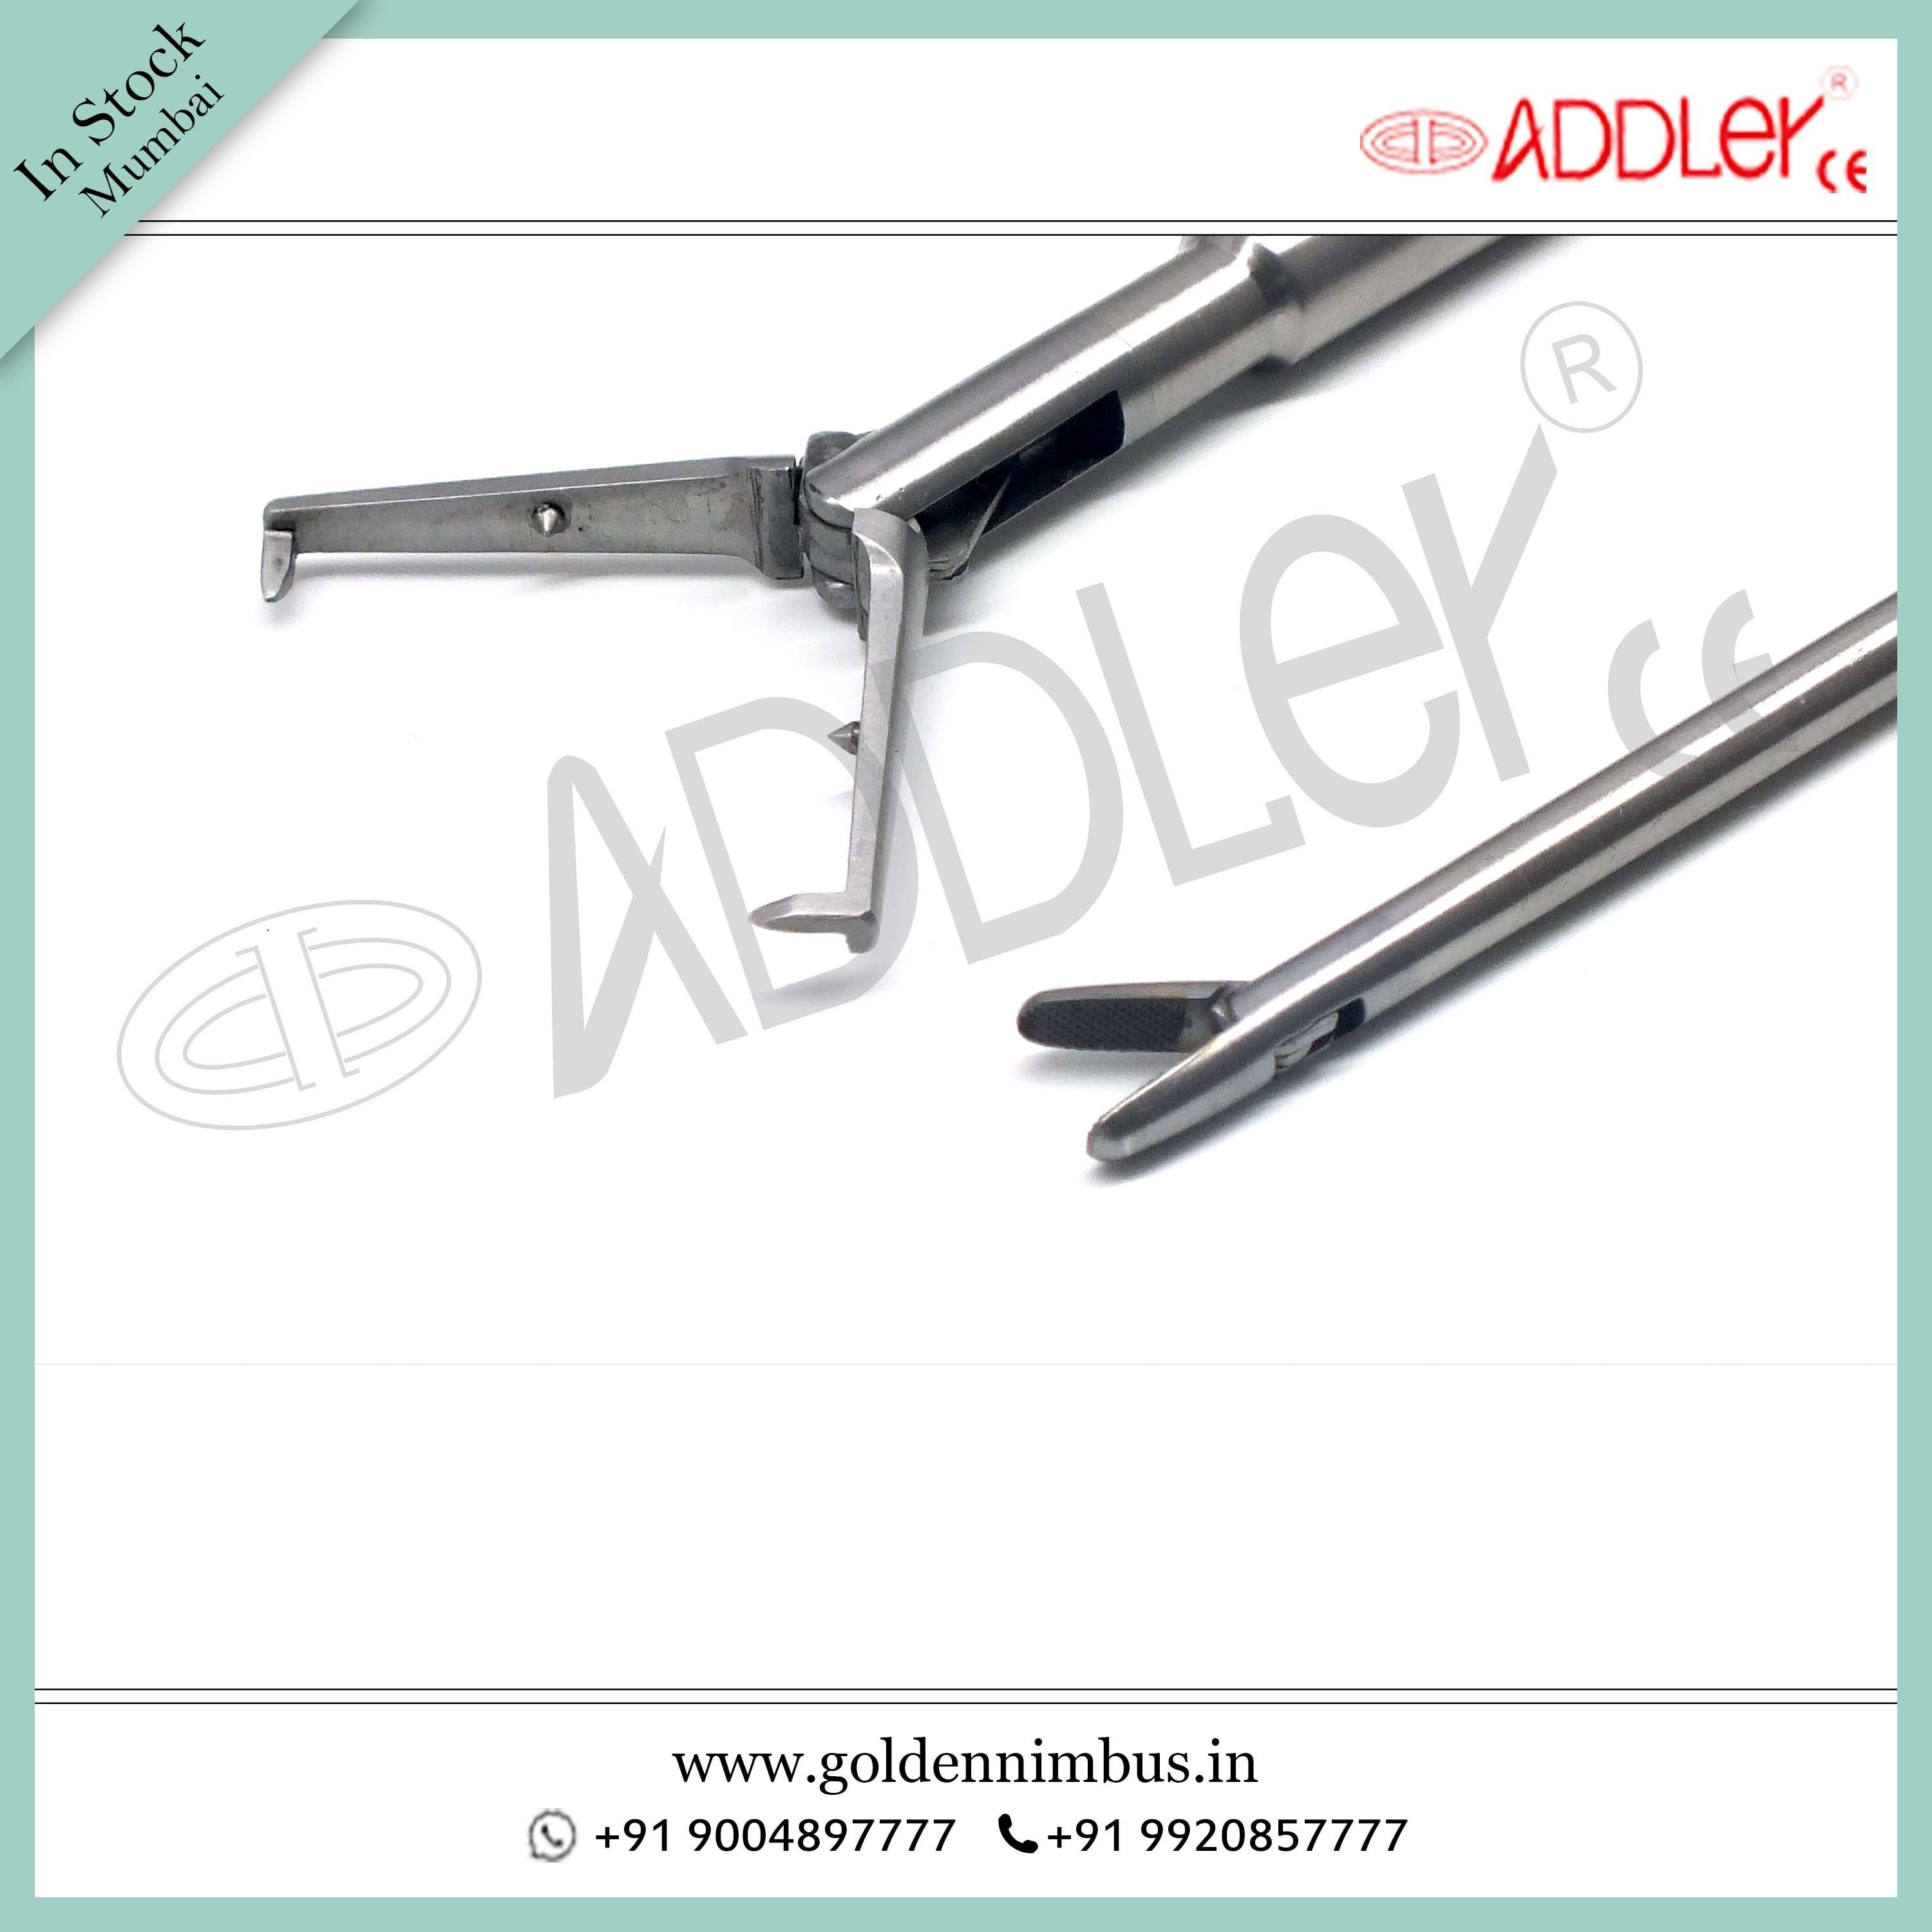 Brand New ADDLER Laparoscopic Needle Holder Straight and Tenaculum Jaw 5mm and 10mm